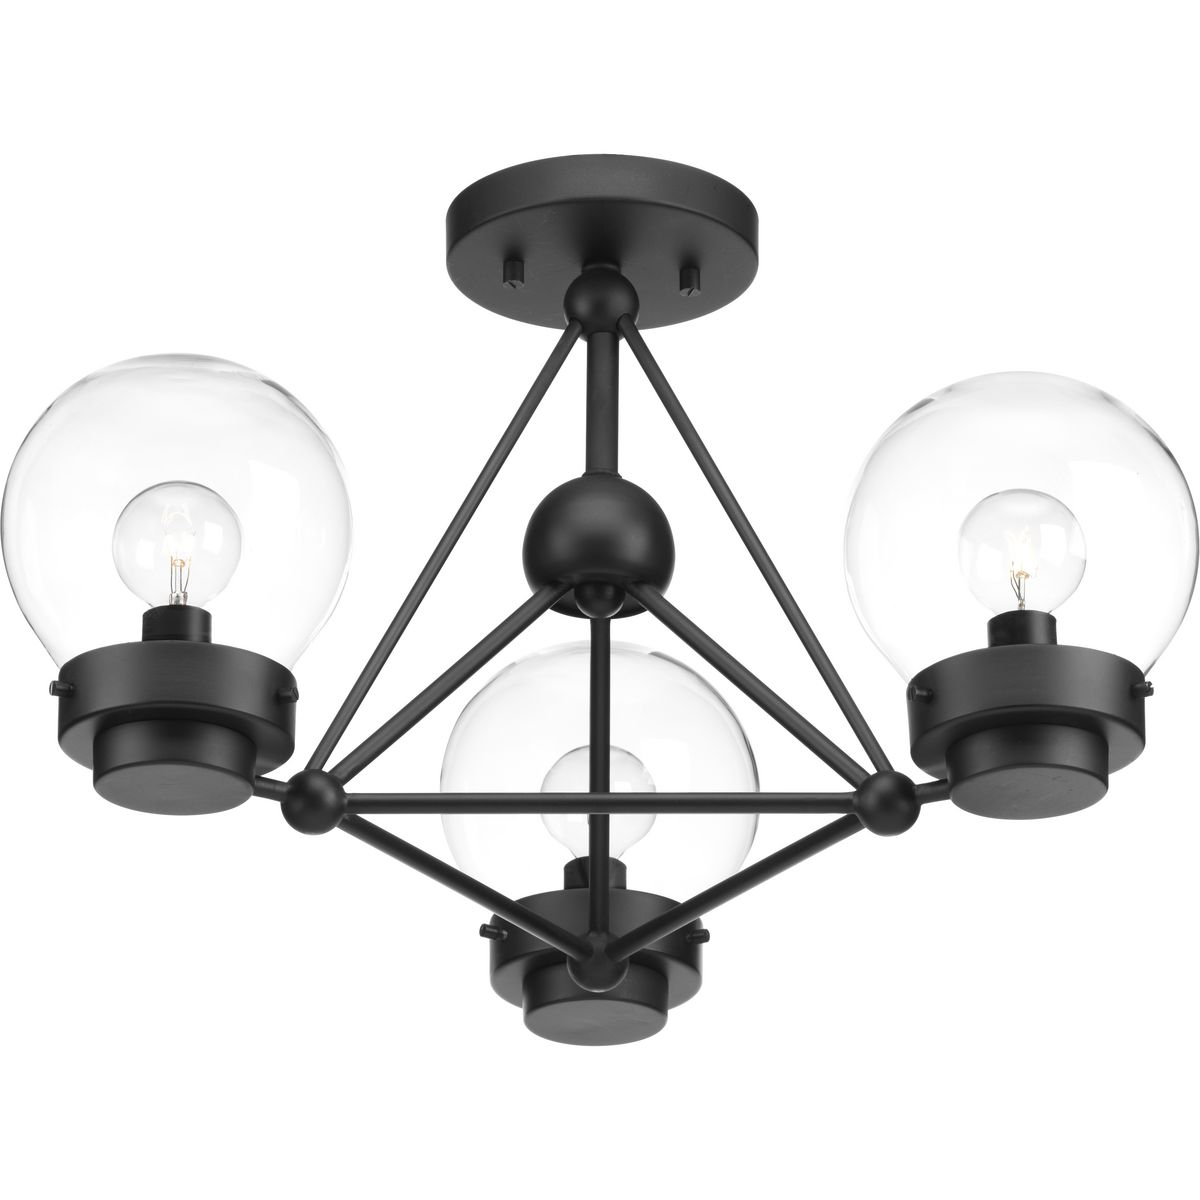 P400077-031 785247216017 Spatial showcases a modern form that complements Urban Industrial and Bohemian styles. Overscaled geometric frames feature designs inspired by metal trusses and the art of engineering. A Matte Black finish is highlighted by clear globe shades. The three-light semi-flush convertible fixture is ideal for foyers and entryways.